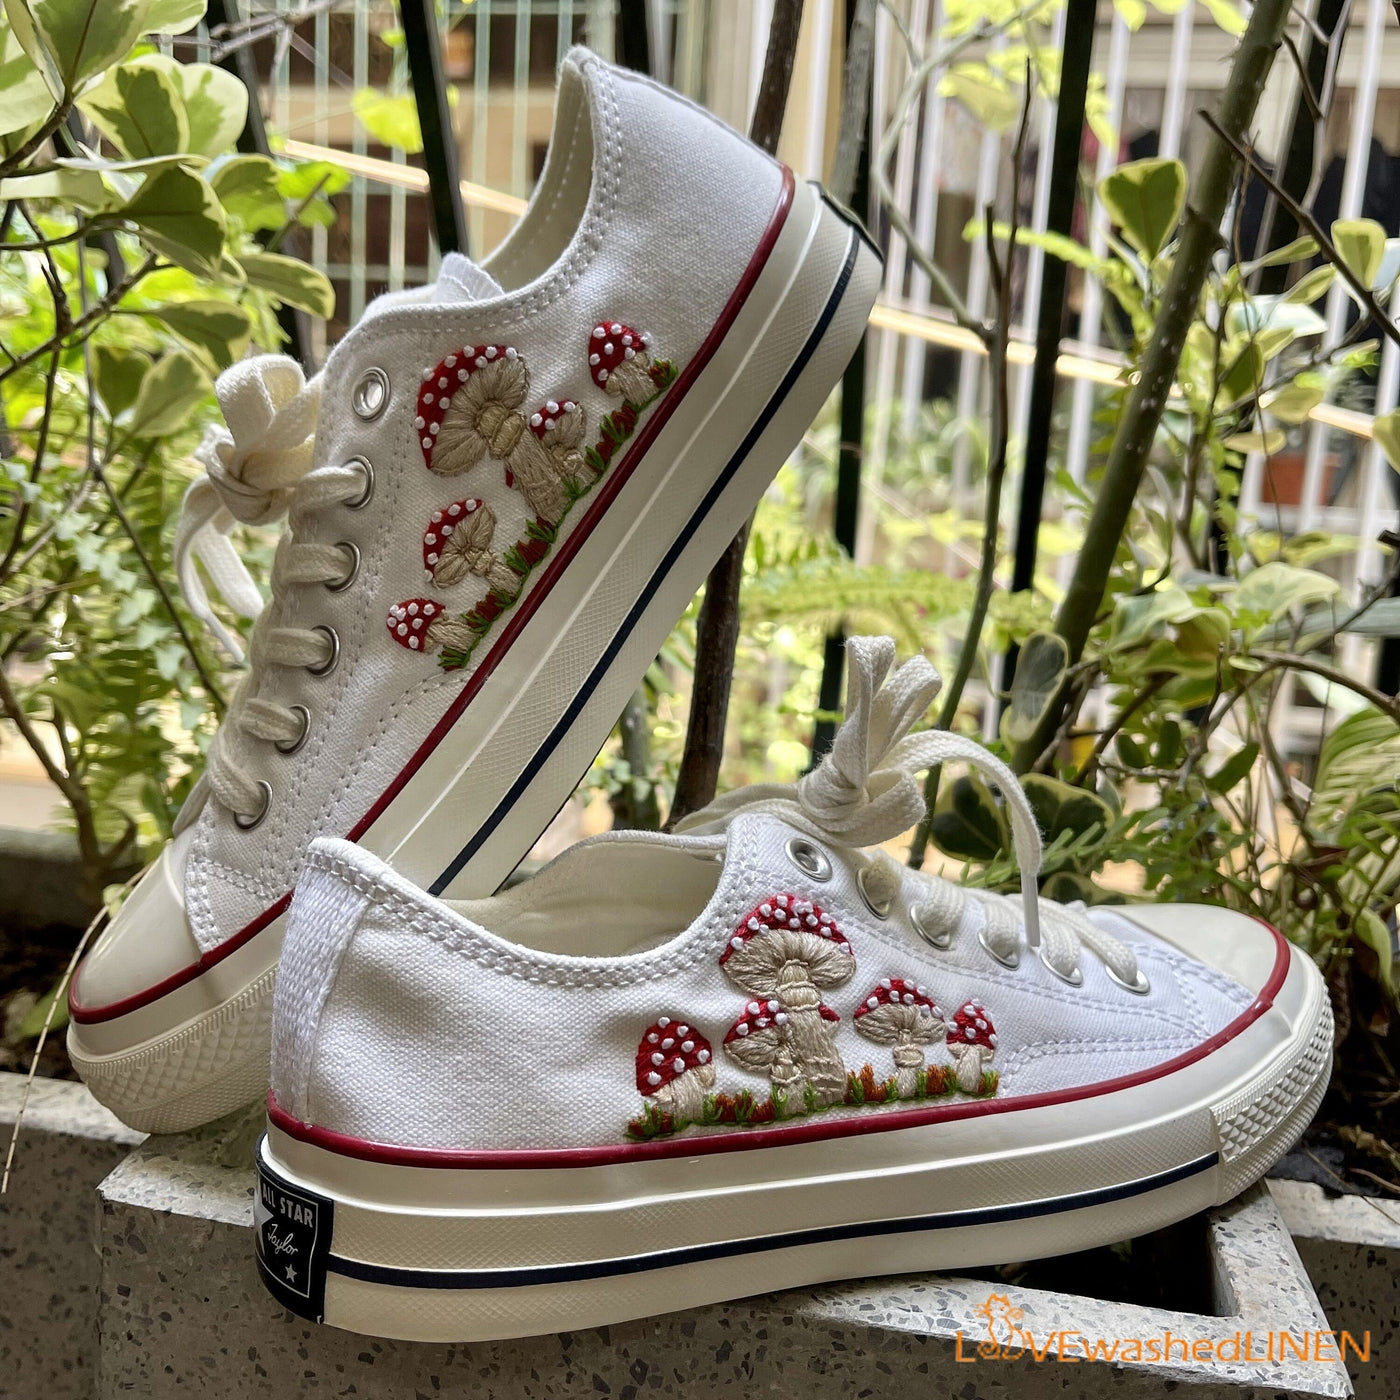 Embroidered Converse Custom Converse Embroidered Mushrooms Flowers